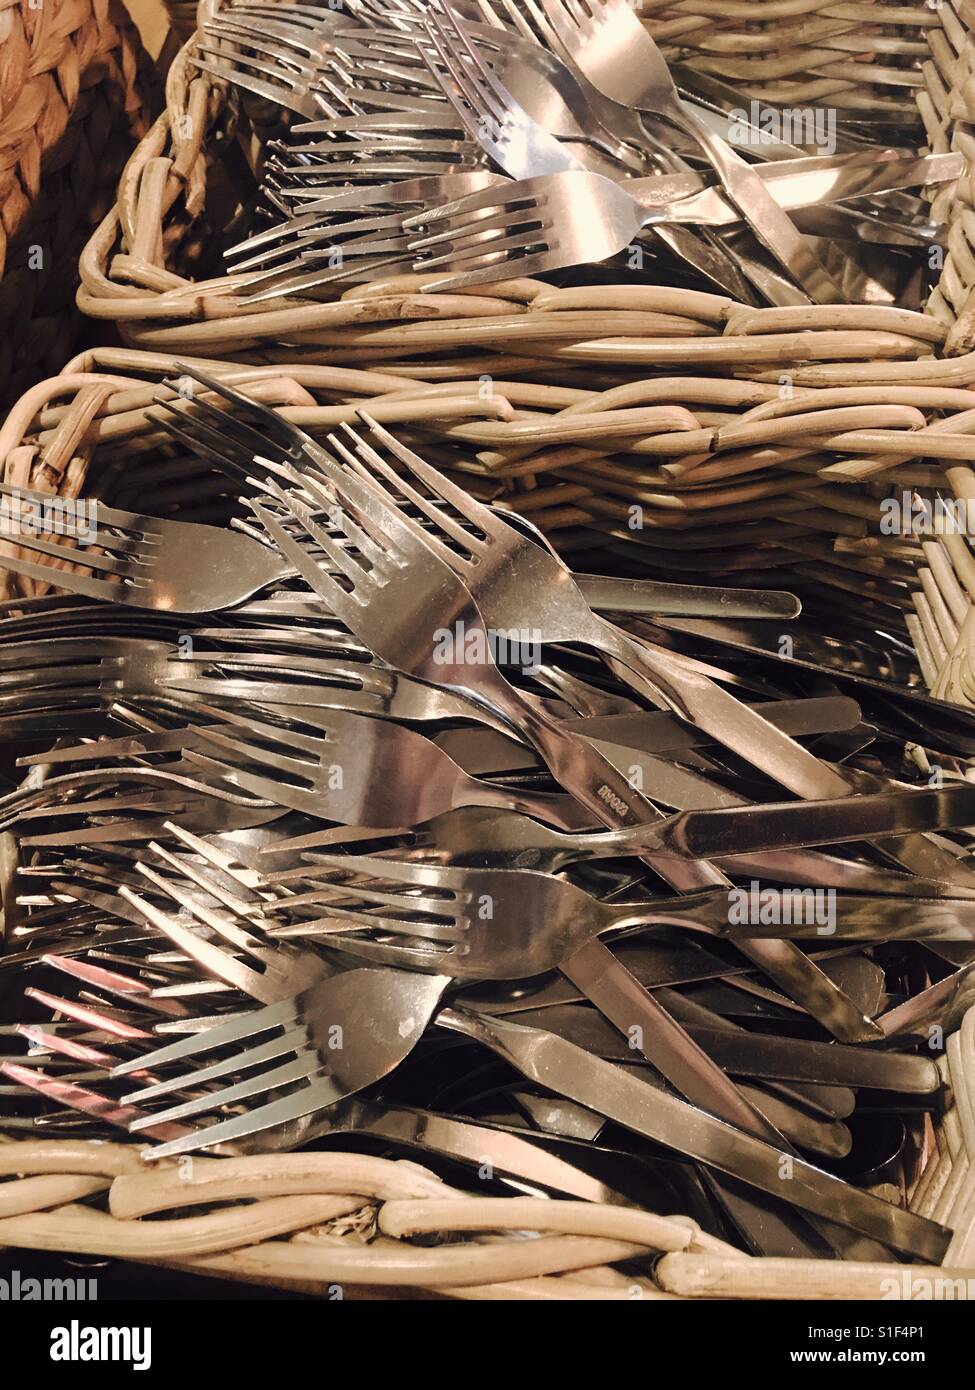 It's of forks ready for service Stock Photo